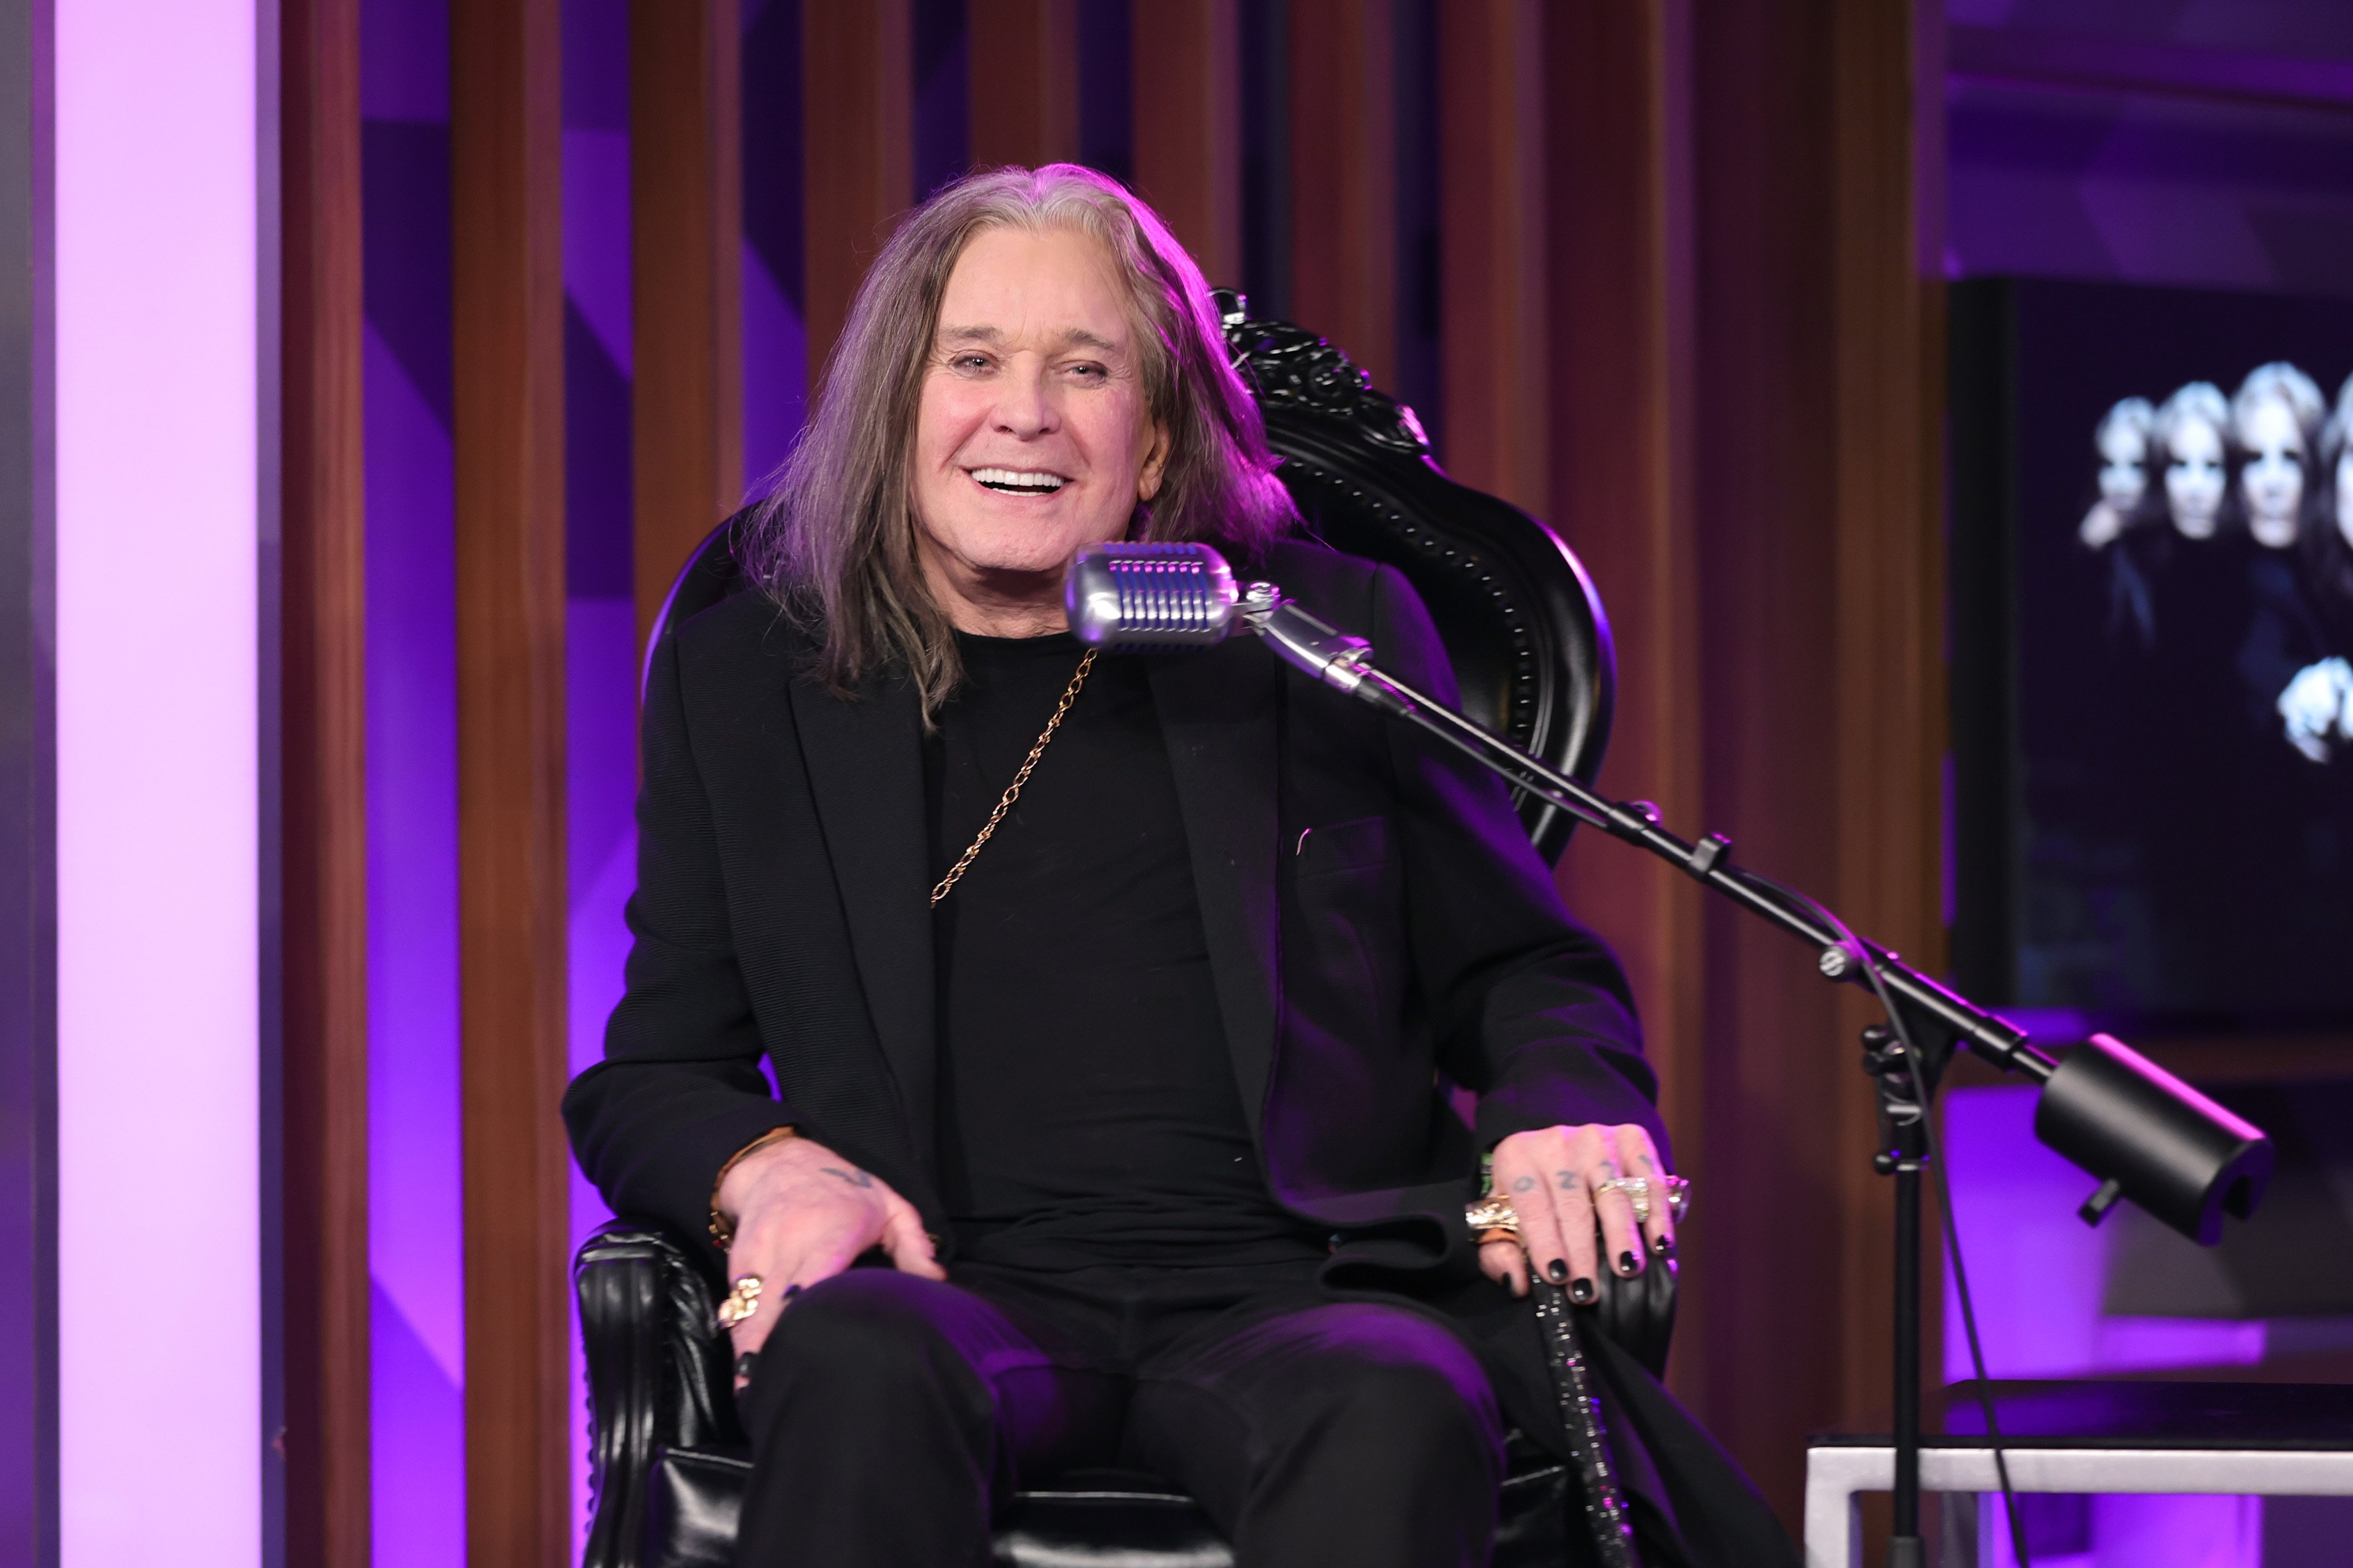 Ozzy Osbourne at the Ozzy Osbourne Album Special on SiriusXM at SiriusXM Studios in LA, California, on July 29, 2022. | Source: Getty Images